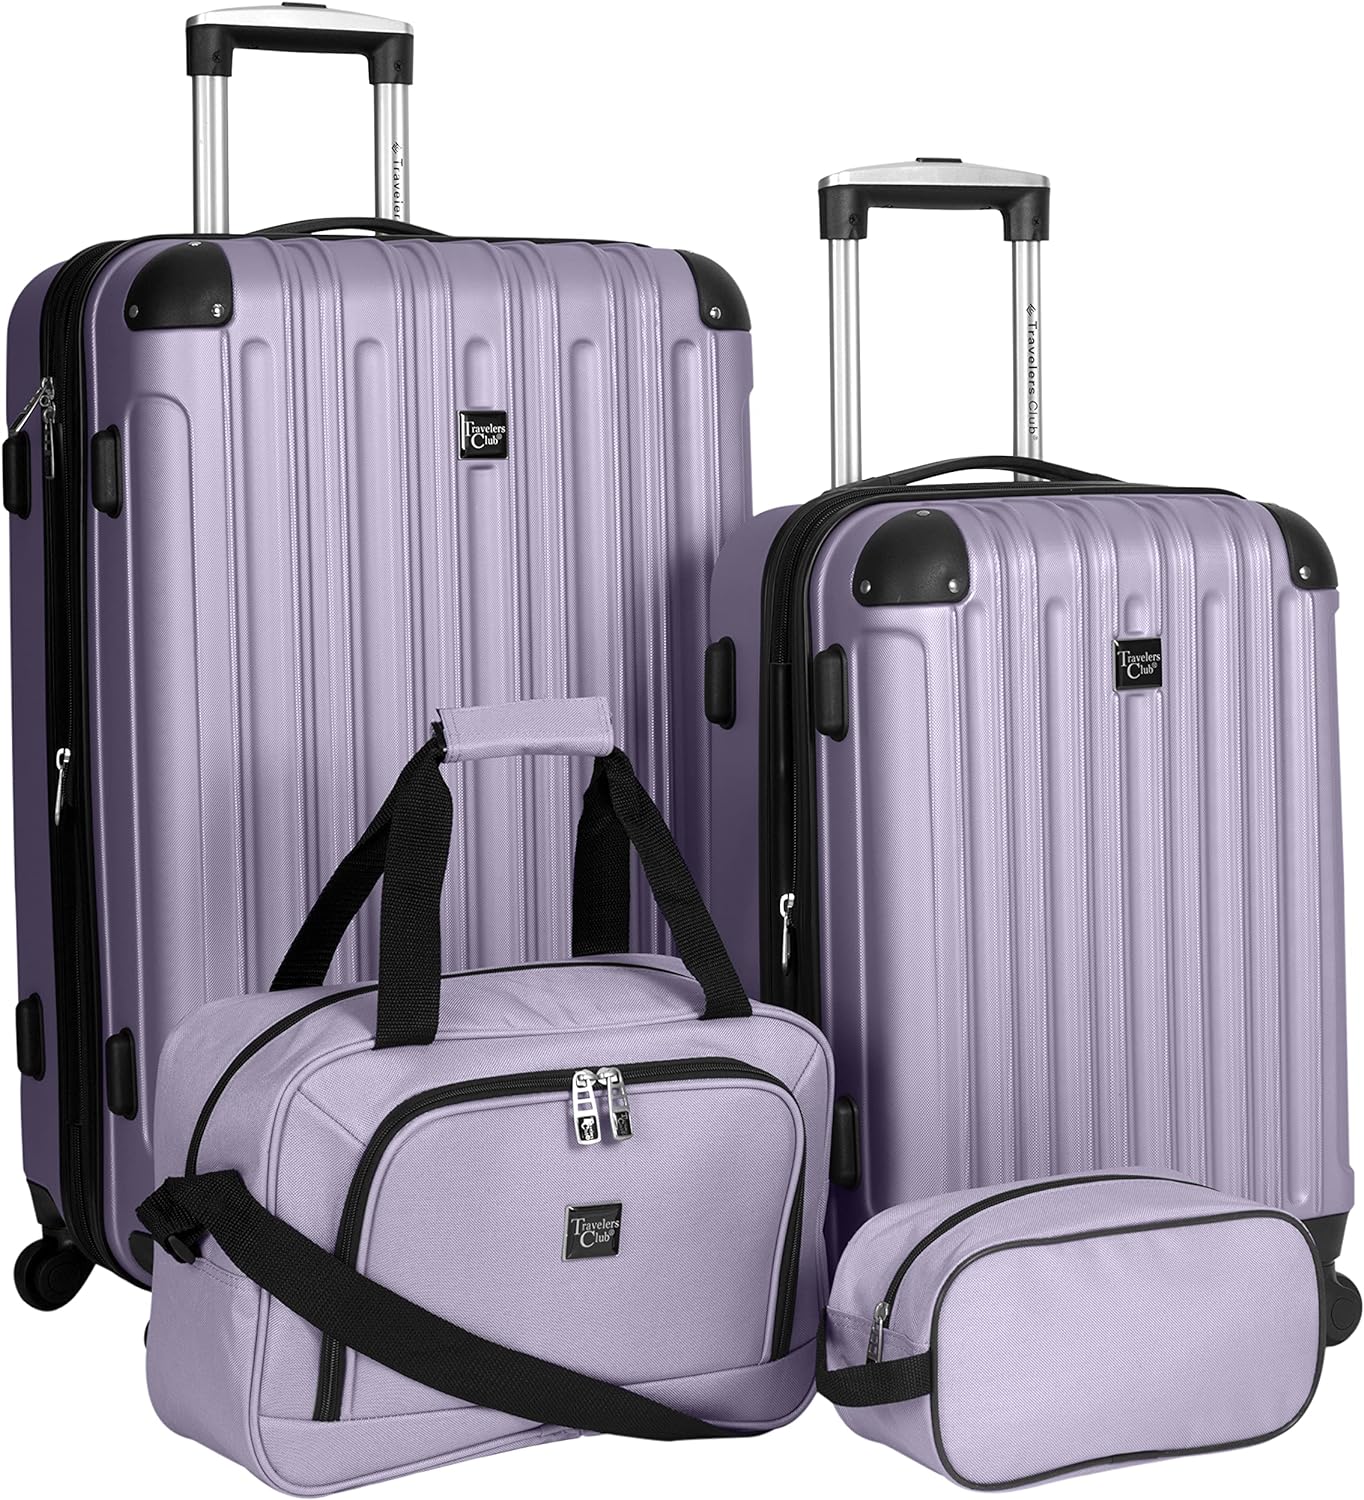 Travelers Club Midtown Hardside Luggage Travel Set, Spinner Wheels,Zippered Divider,Telescopic Handle,Lightweight, Lilac, 4-Piece Set 